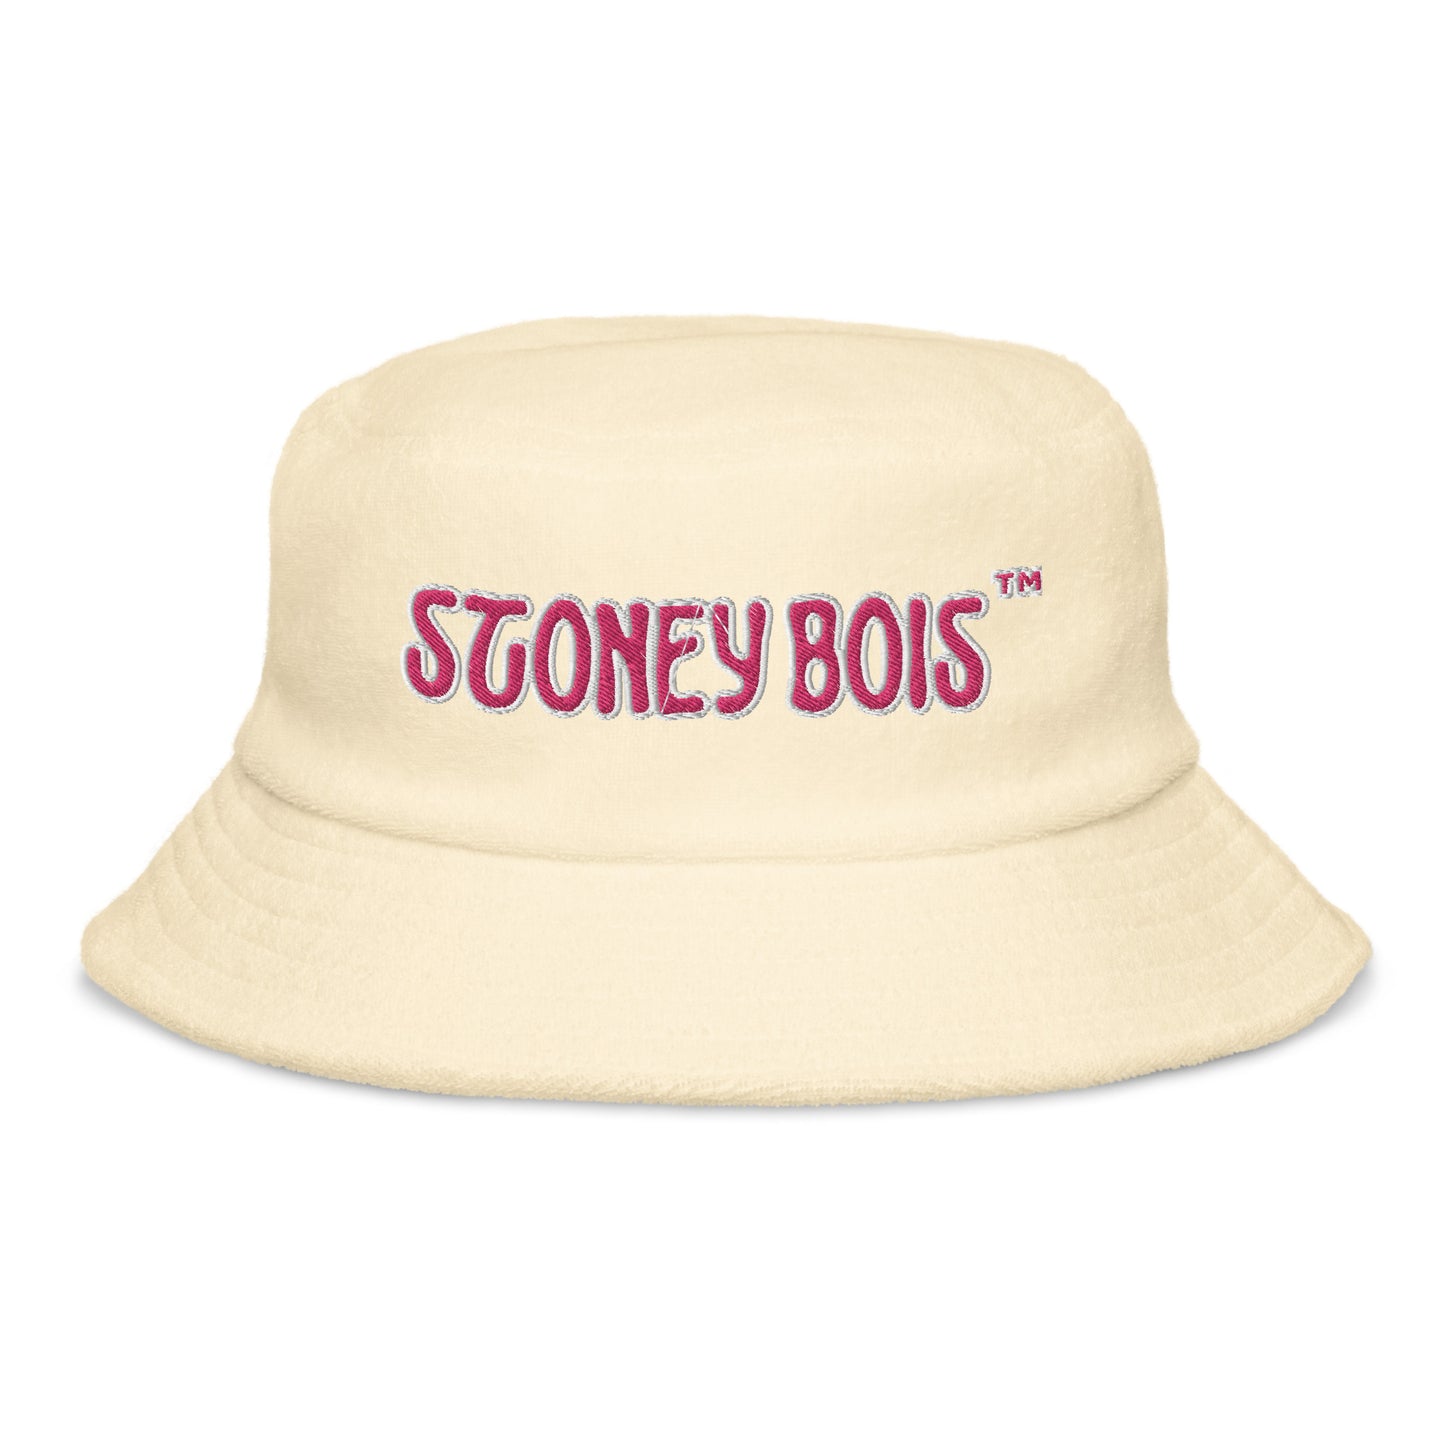 Unstructured terry cloth bucket hat Stoney Bois embroidered